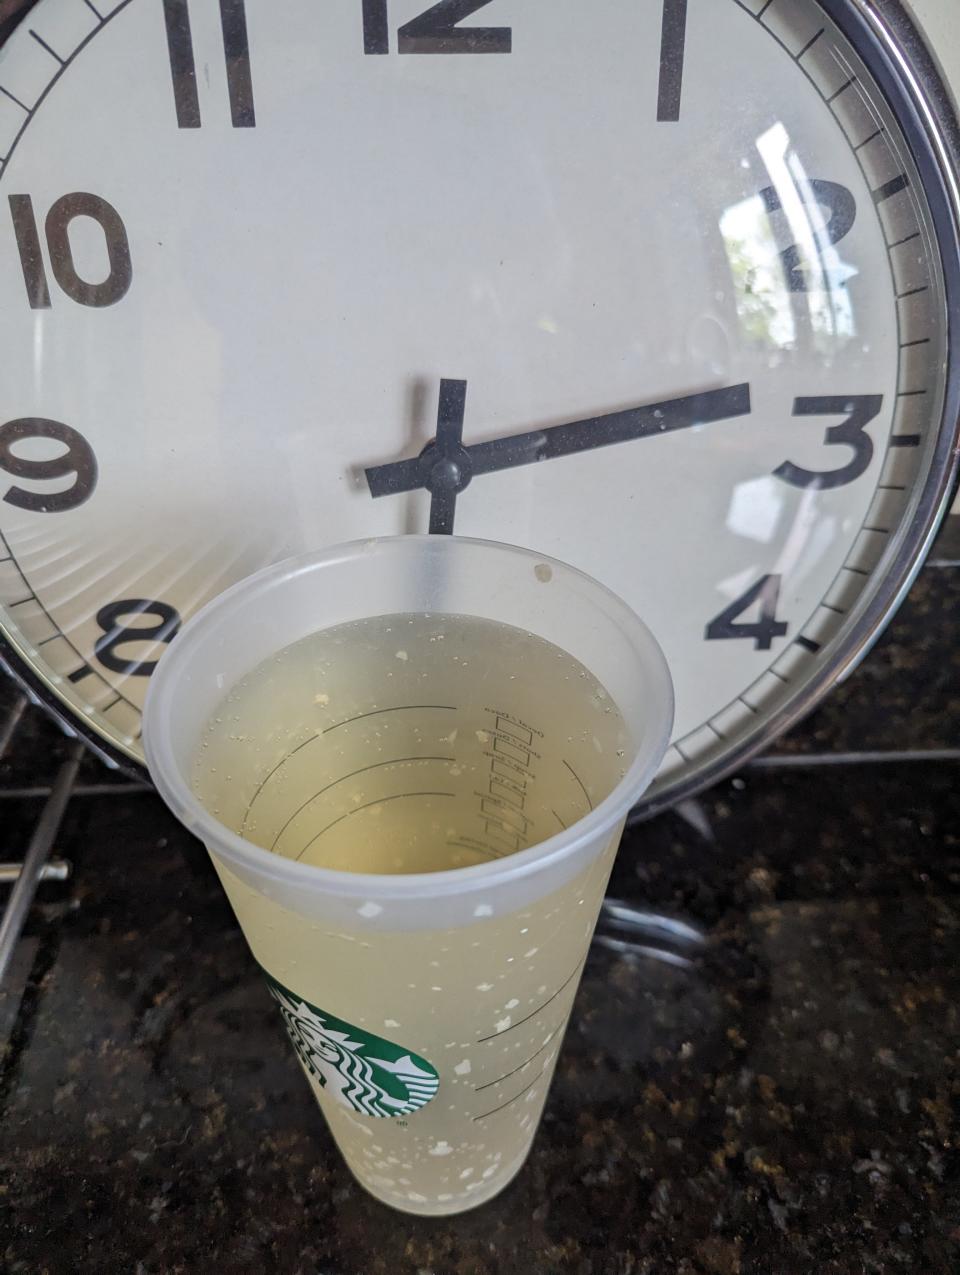 Village of Cleveland resident Scott Eckelaert emailed a photo of his tap water to village public works director Chris Jost and village manager Stacy Grunwald in July.